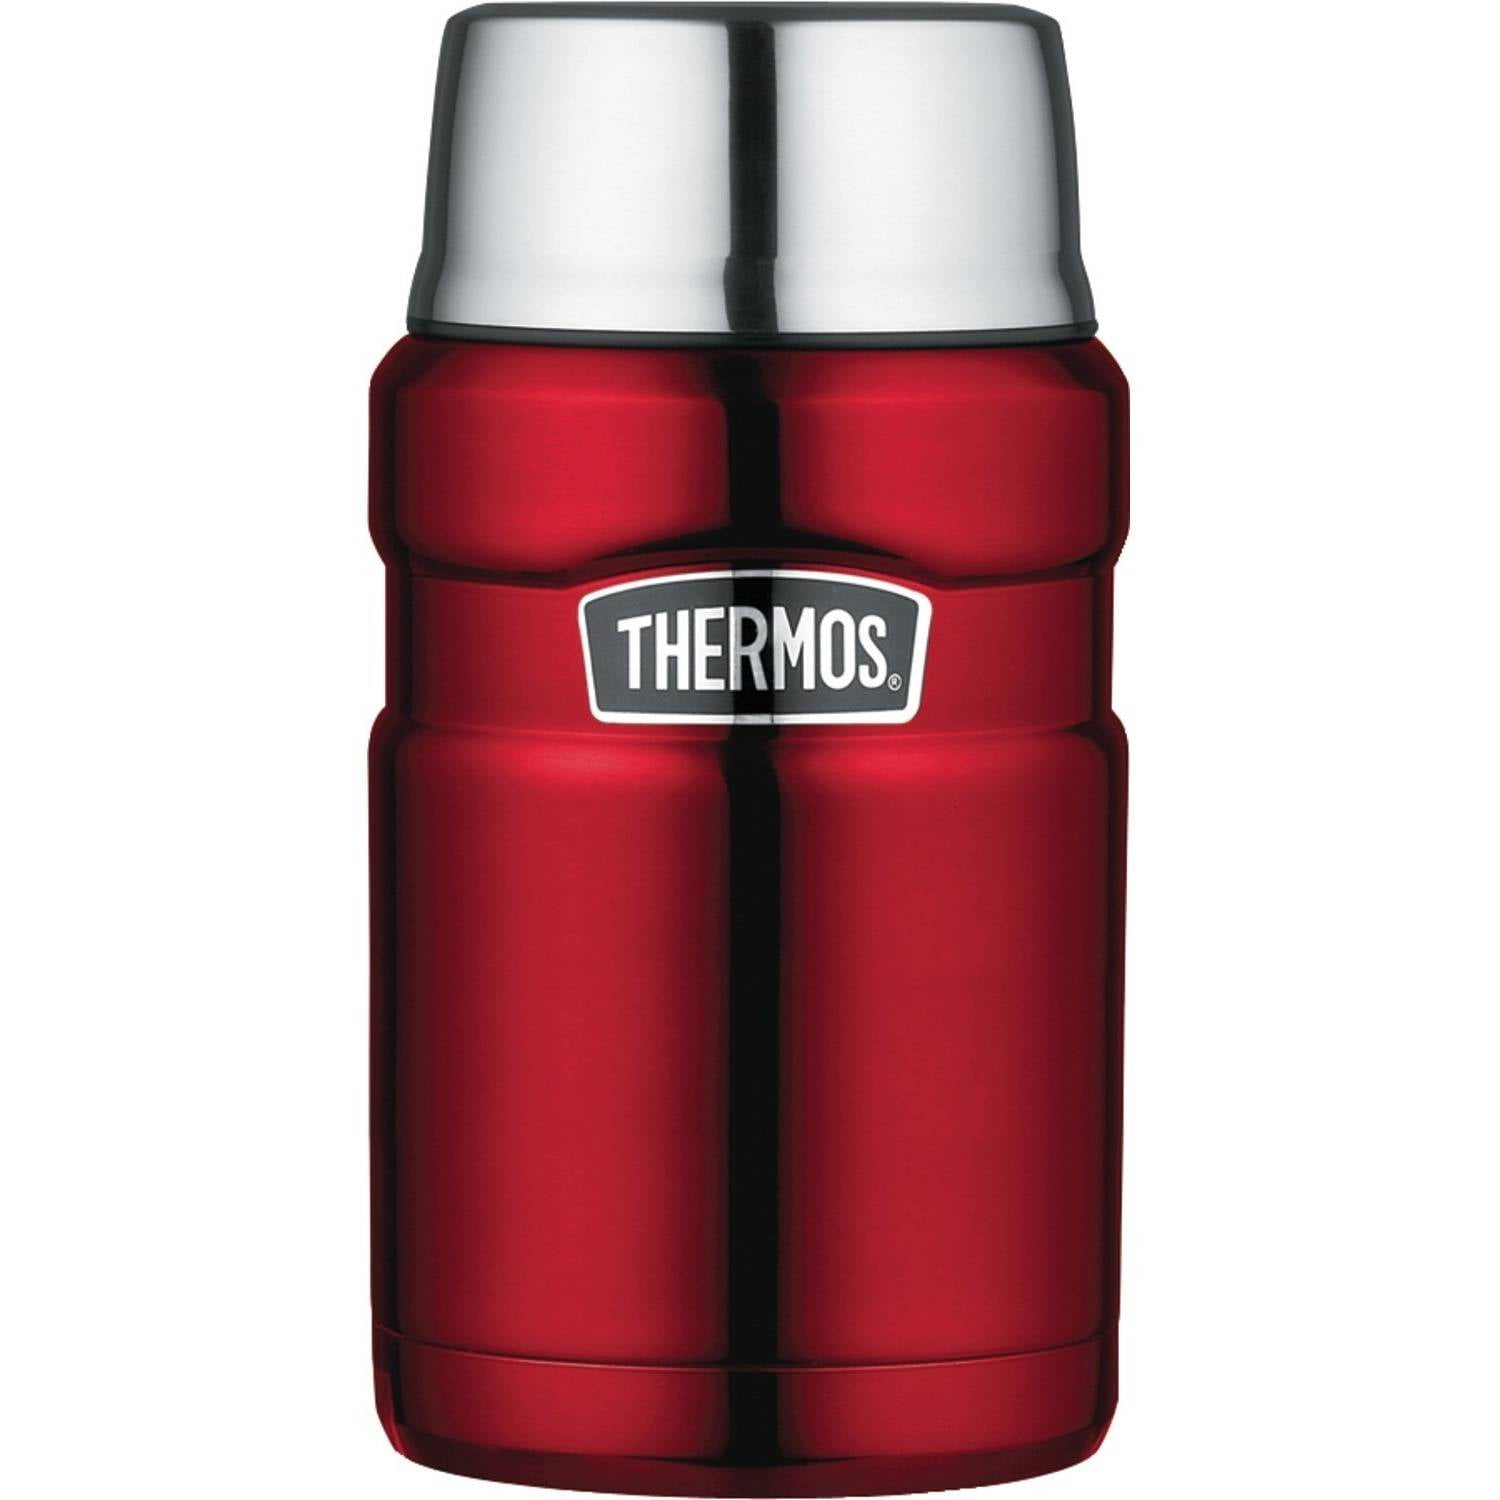 Thermos Stainless King Vacuum Insulated Food Jar 24 Oz Cranberry Red Walmart Com Walmart Com